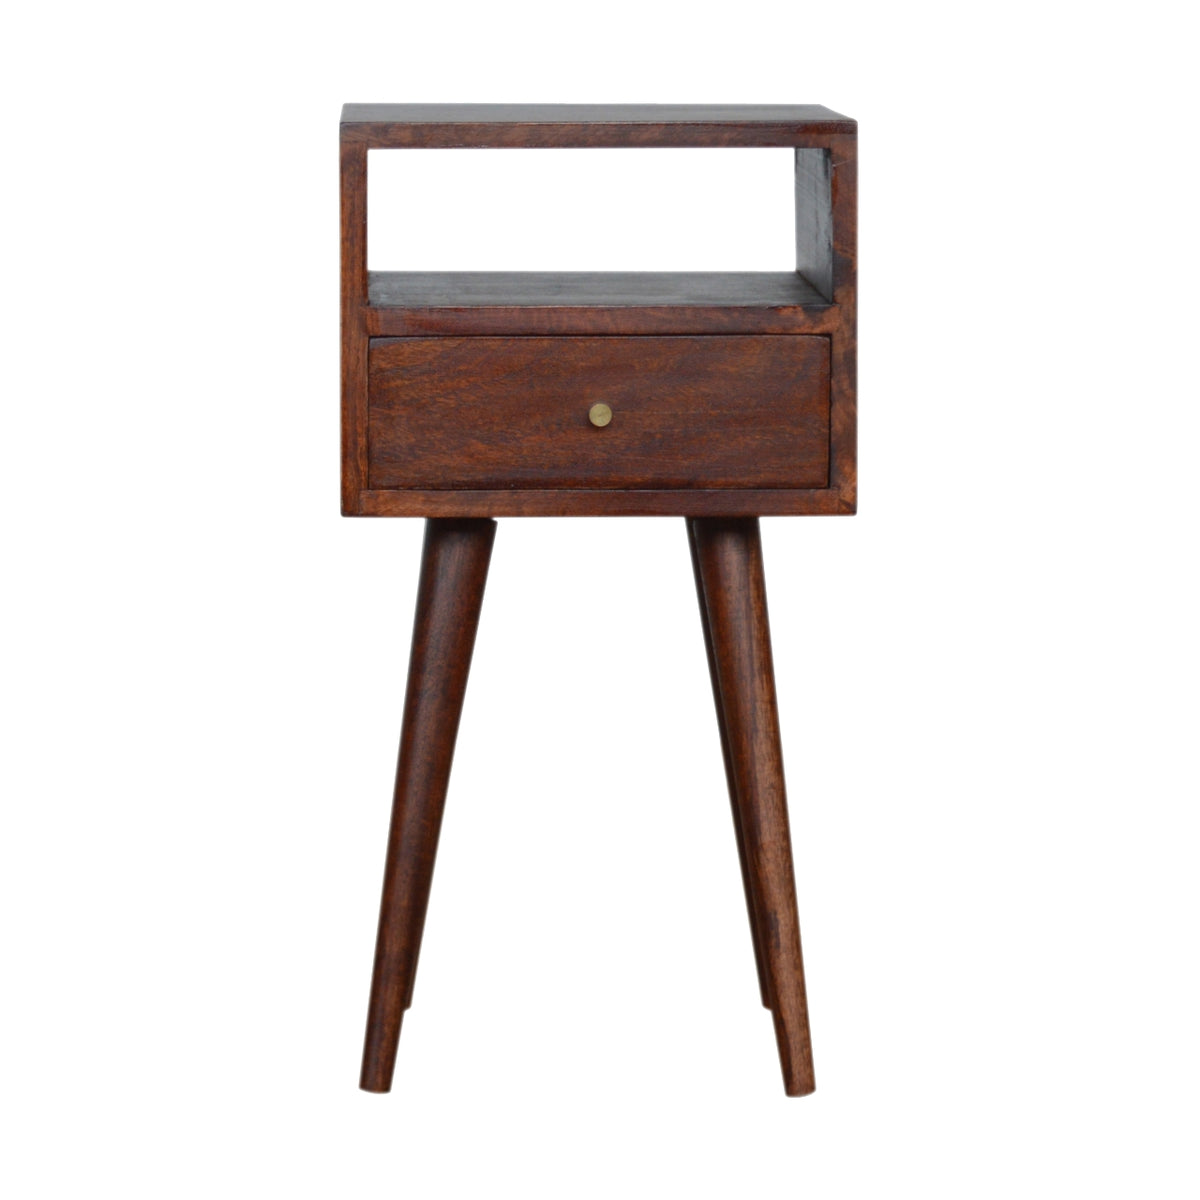 dark wood 30cm wide narrow bedside table for small space uk